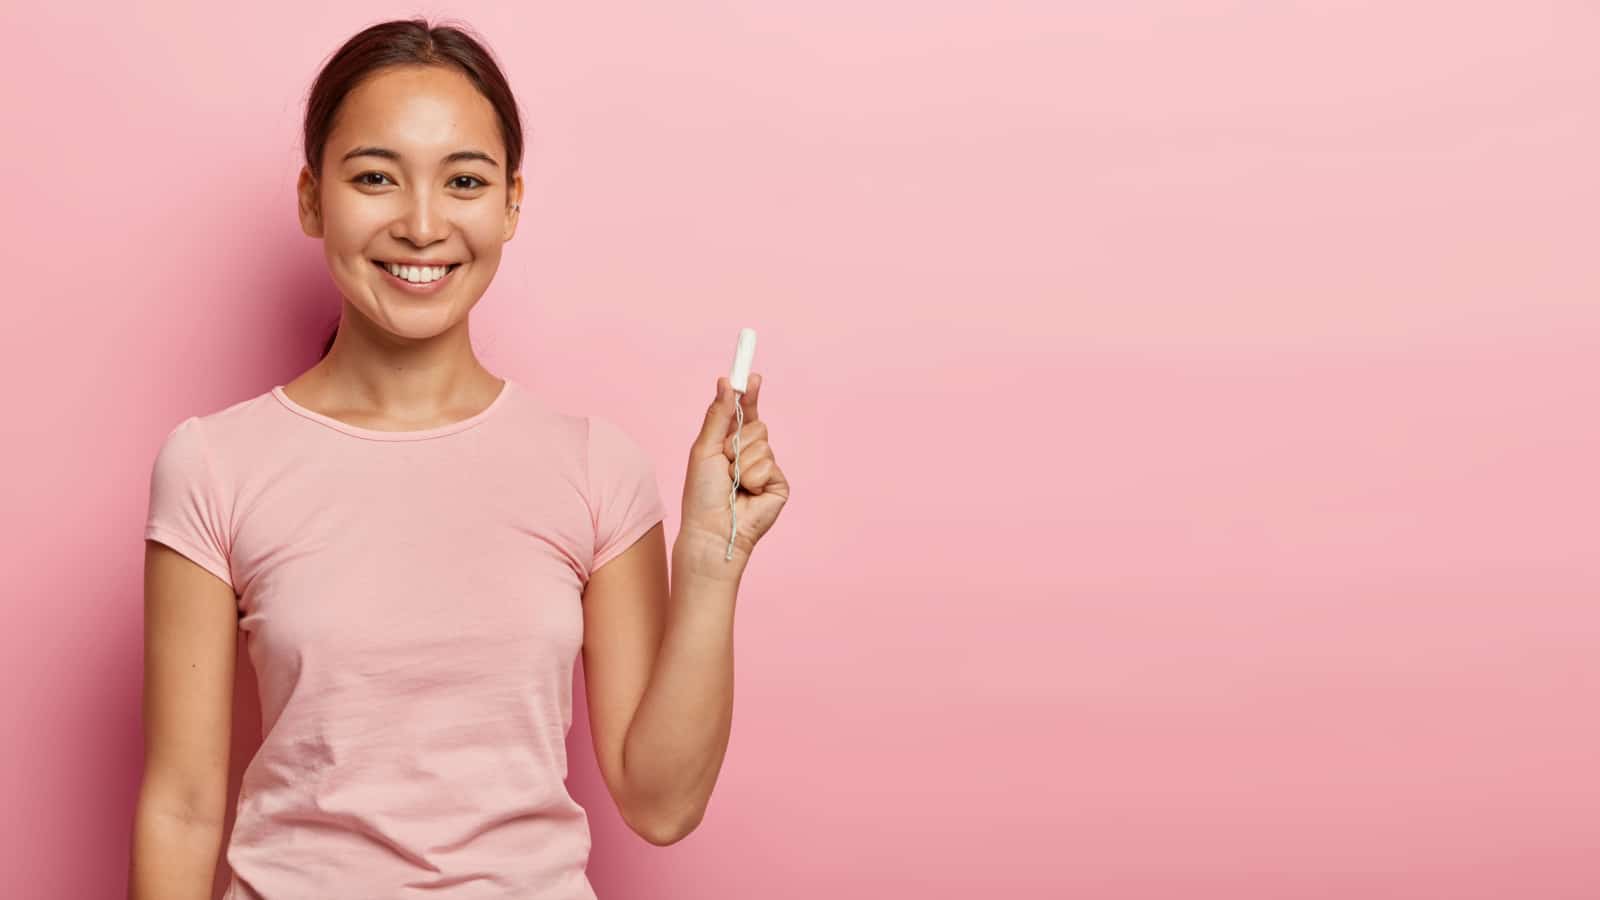 Pretty dark haired female with Asian appearance, holds cotton tampon, cares about hygiene during menstruation, has happy look, dressed in casual outfit. Women, health care, wellbeing concept